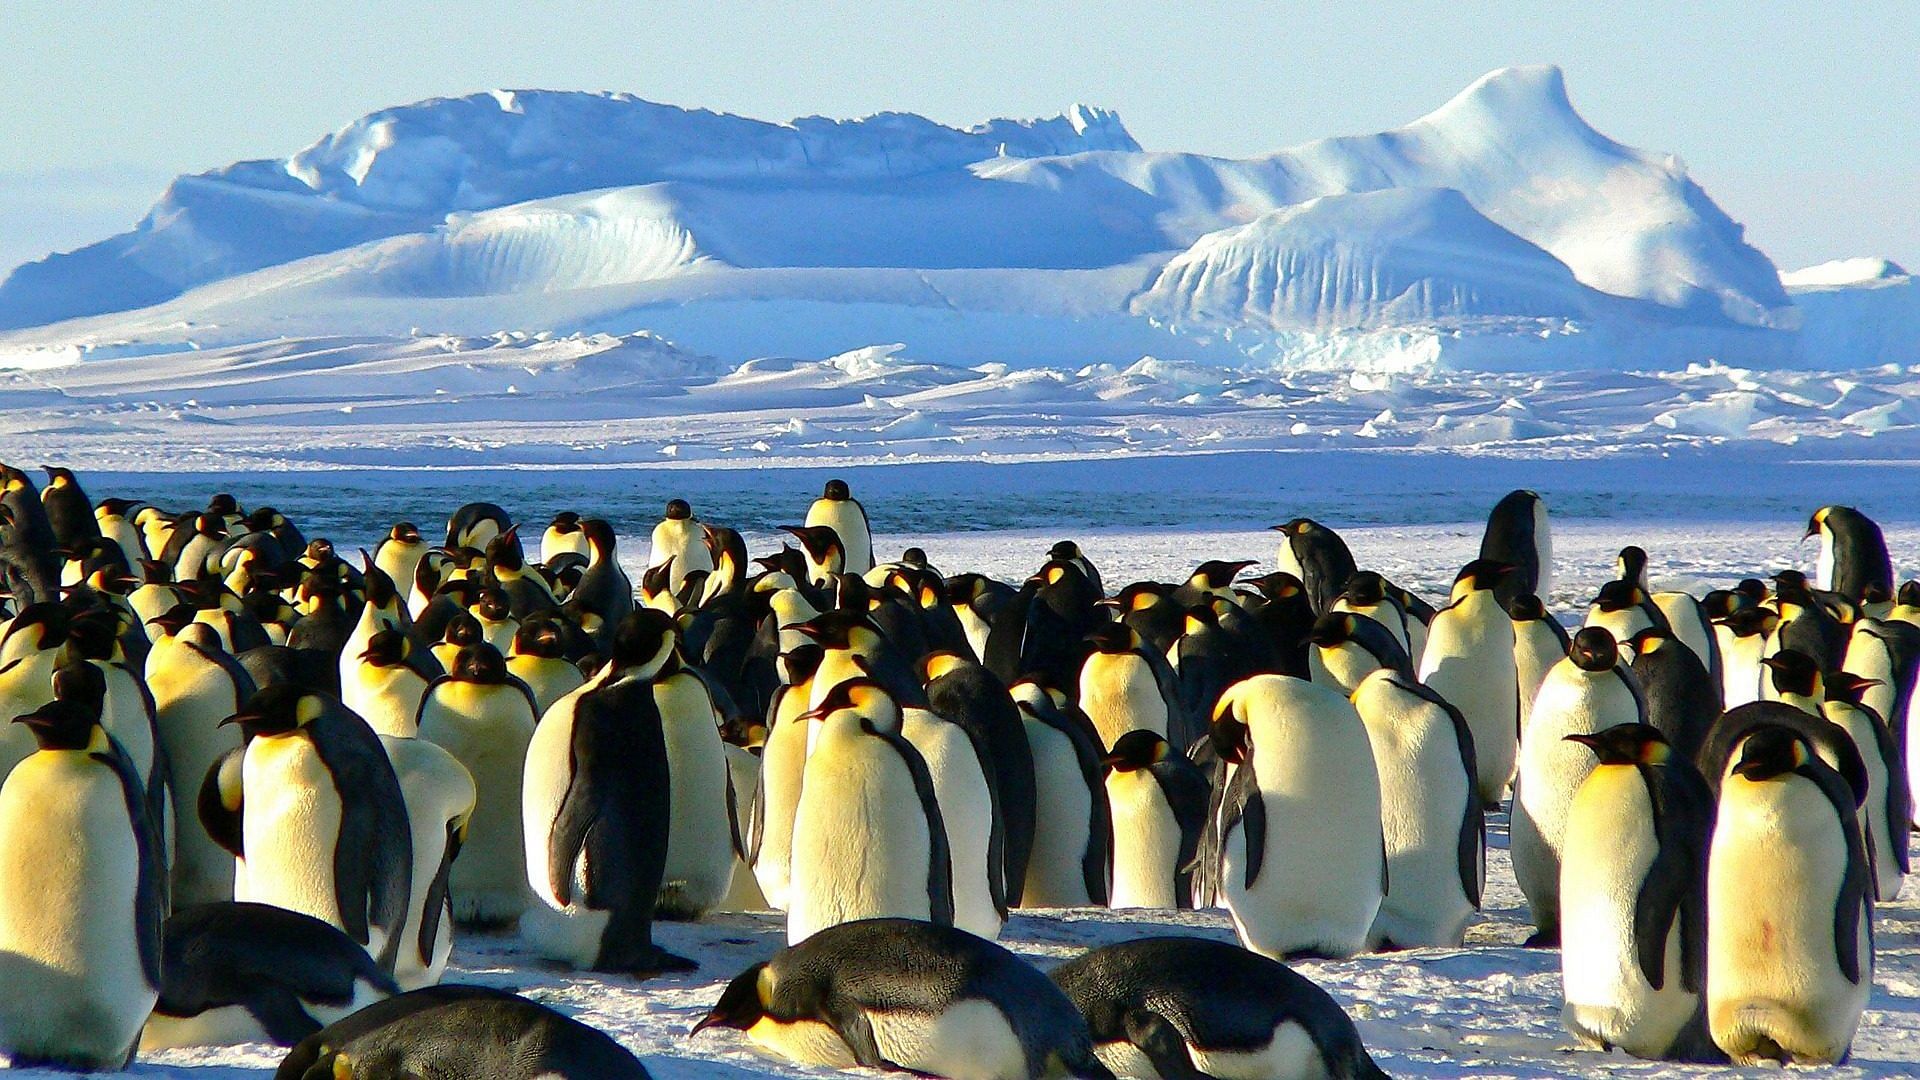 98% of emperor penguin colonies could be extinct by 2100 as ice melts